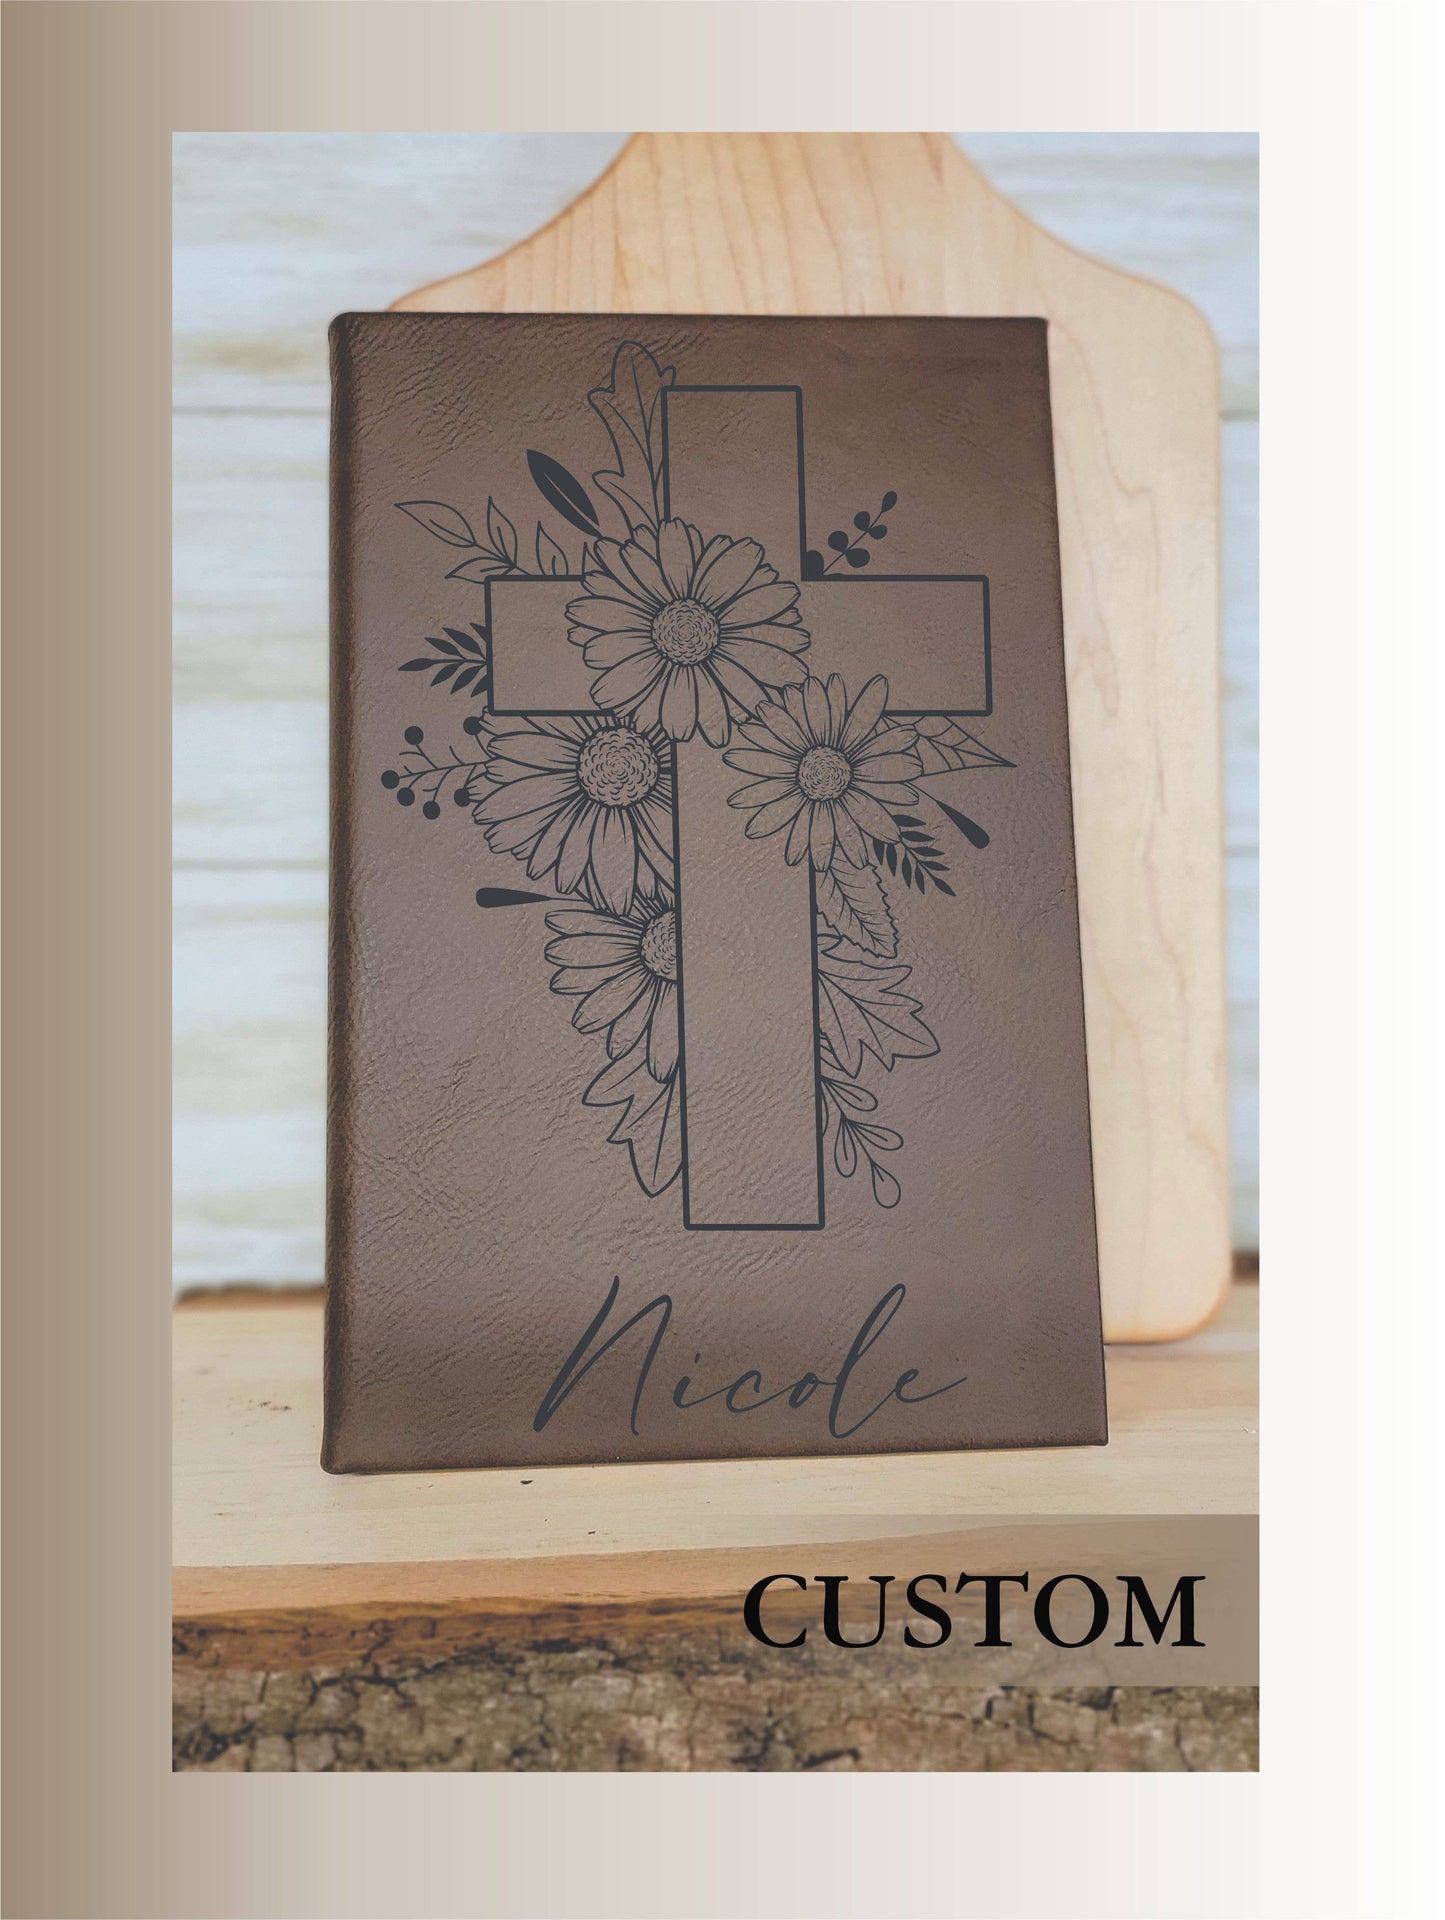 Leather Engraved Journal. 5.5x8.5" Lined Journal: Floral Cross